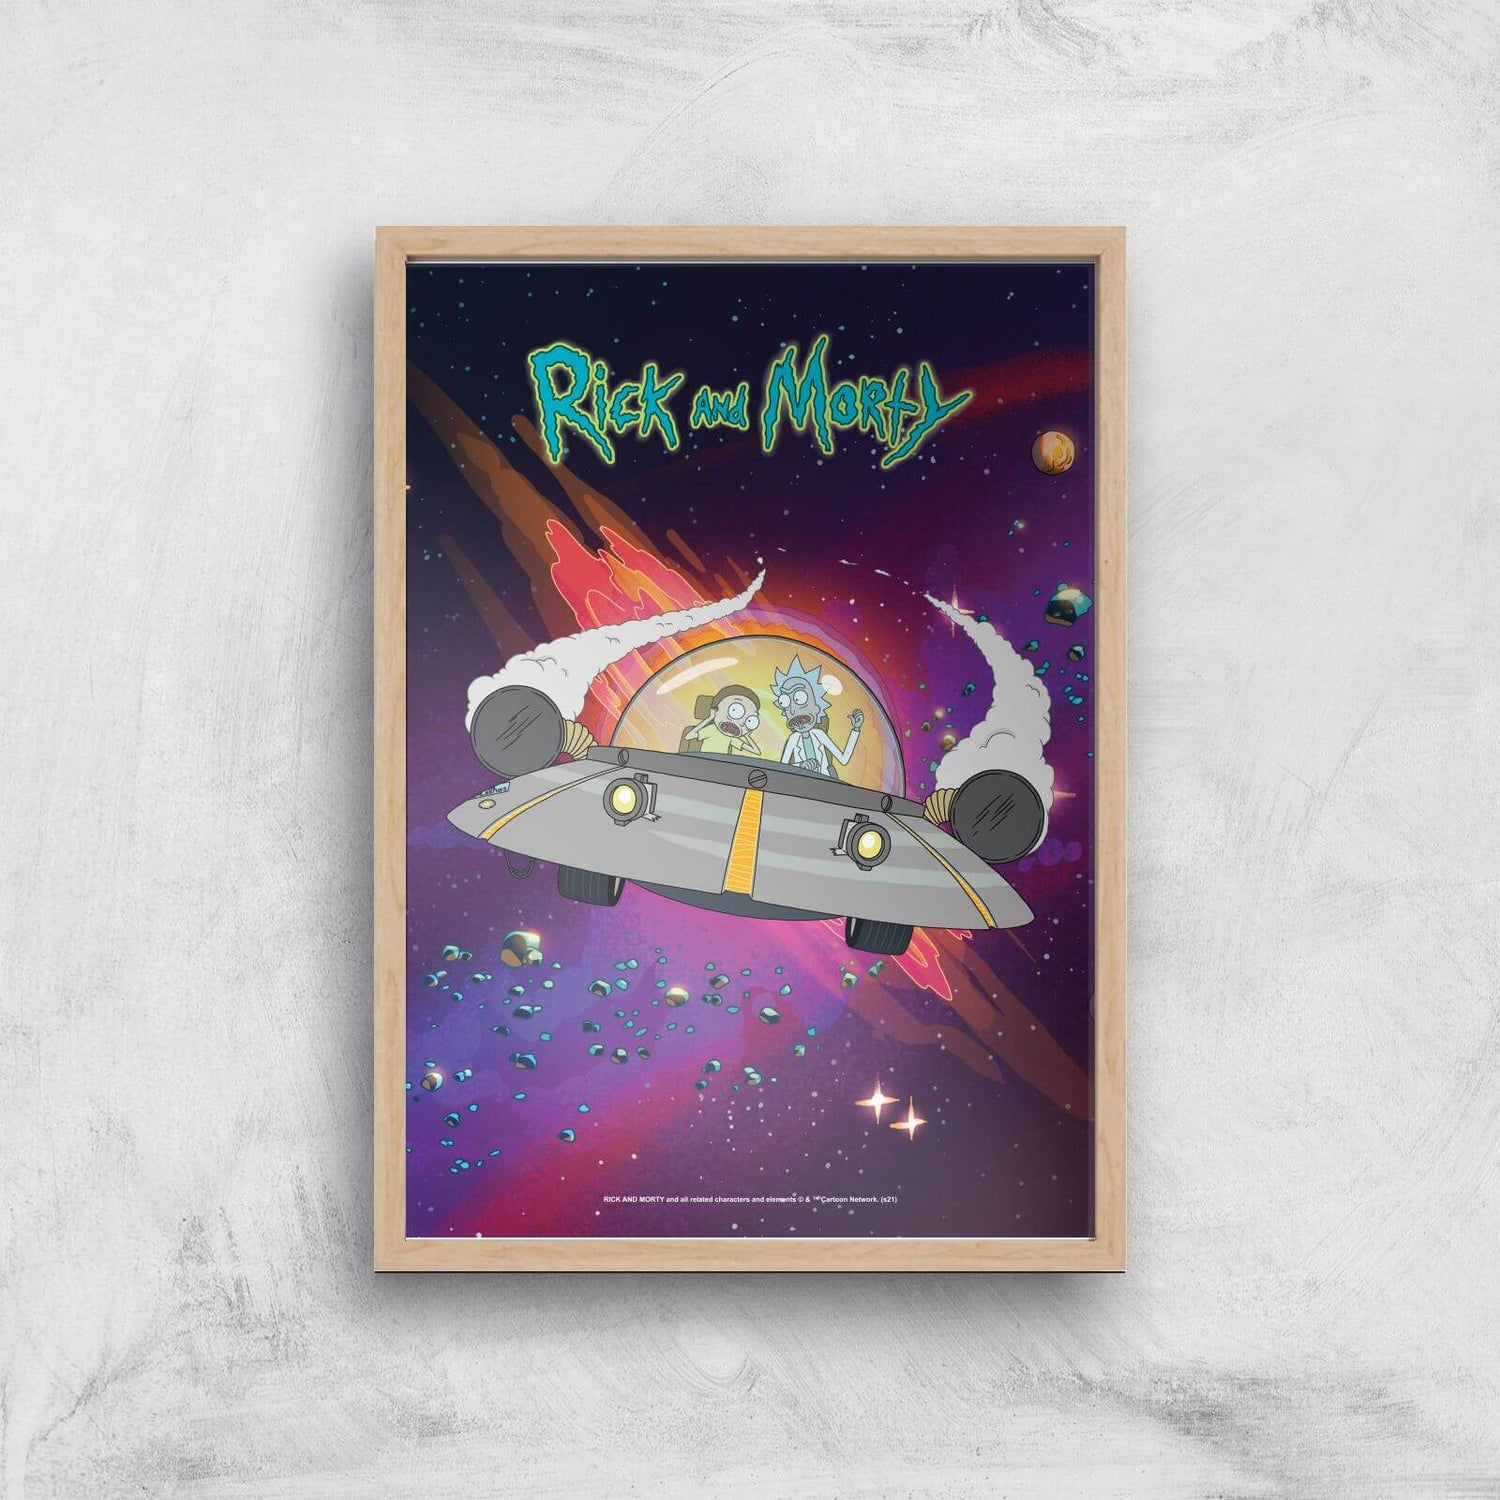 Rick and Morty Rocket Adventure Giclee Art Print - A4 - Wooden Frame